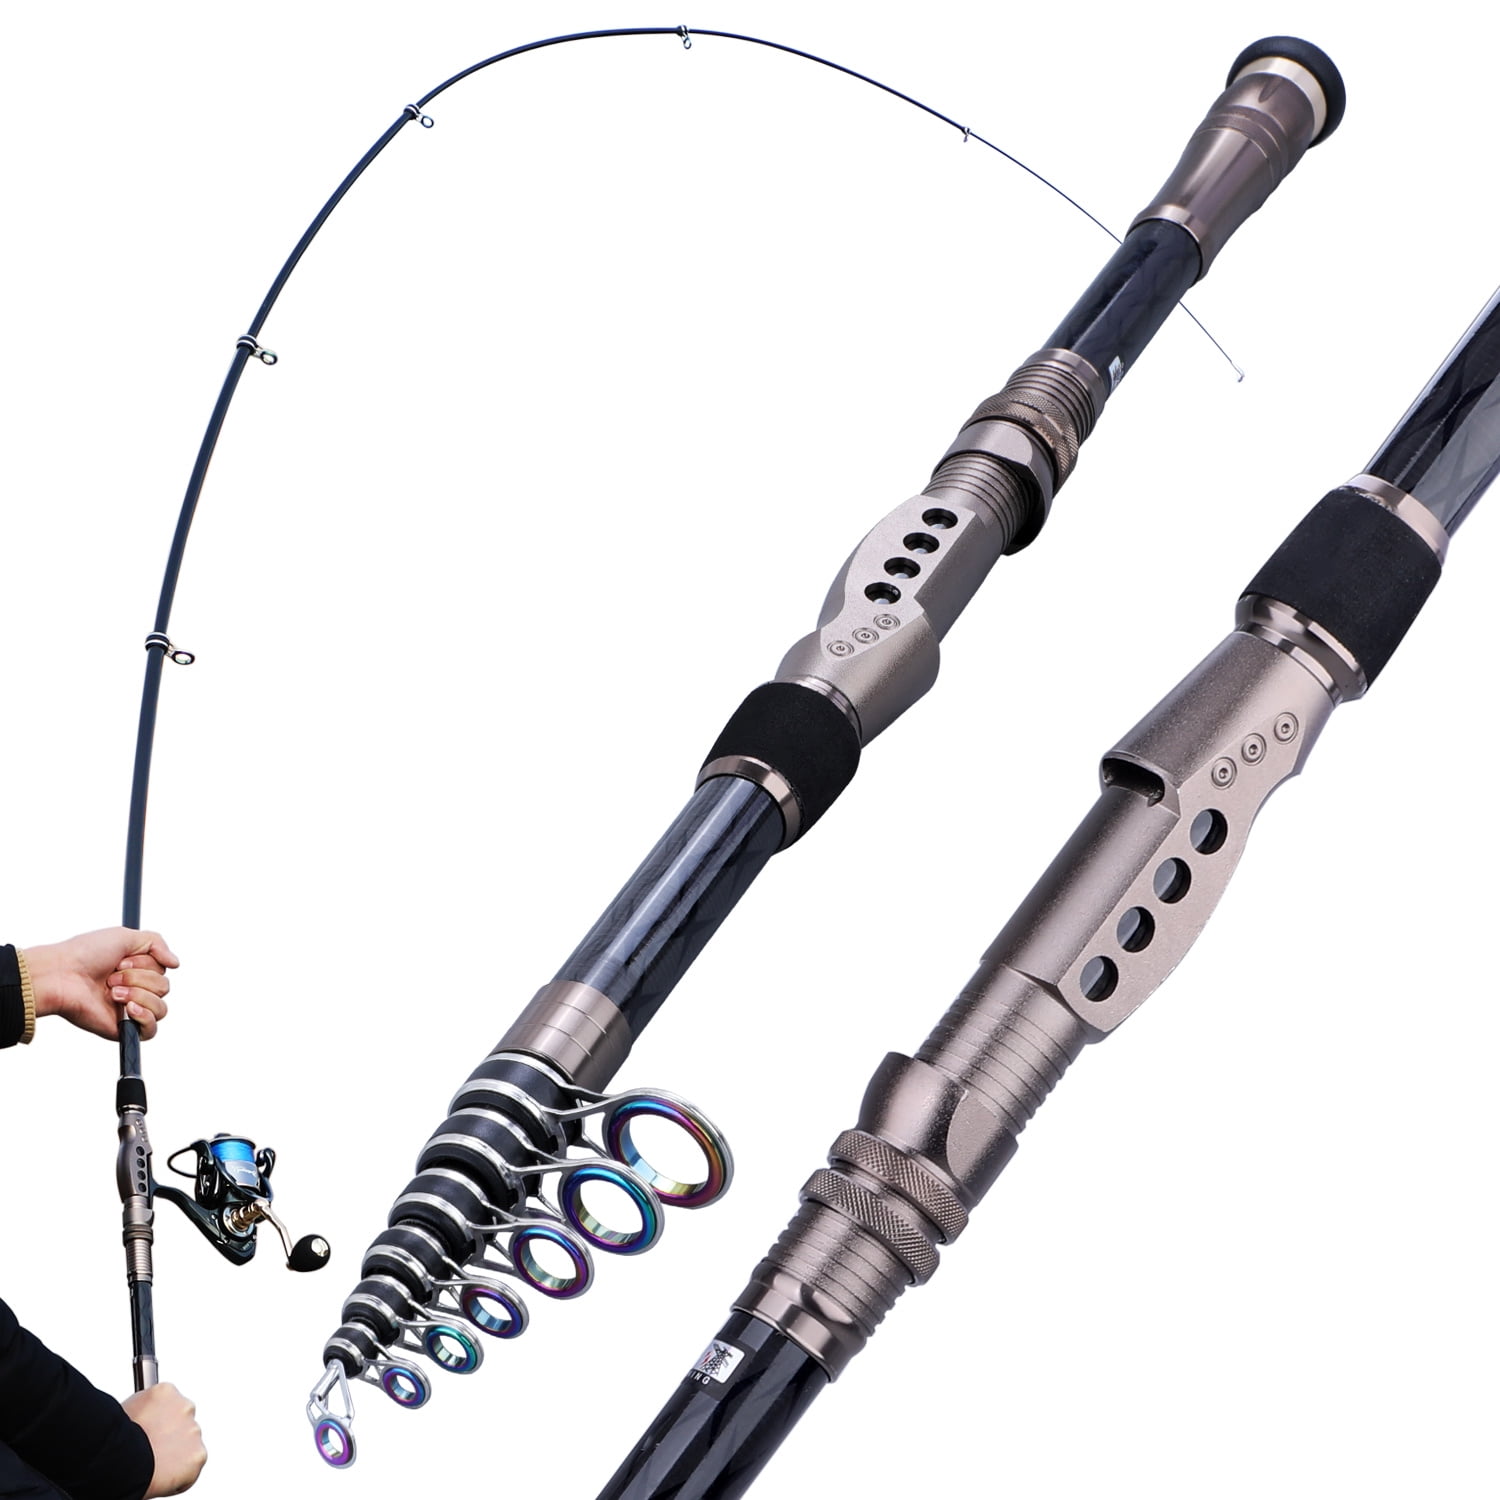 Carbon Fiber Spinning Fishing Rod and Reel Combo Set Telescopic Pole 1.5m 3.0m 